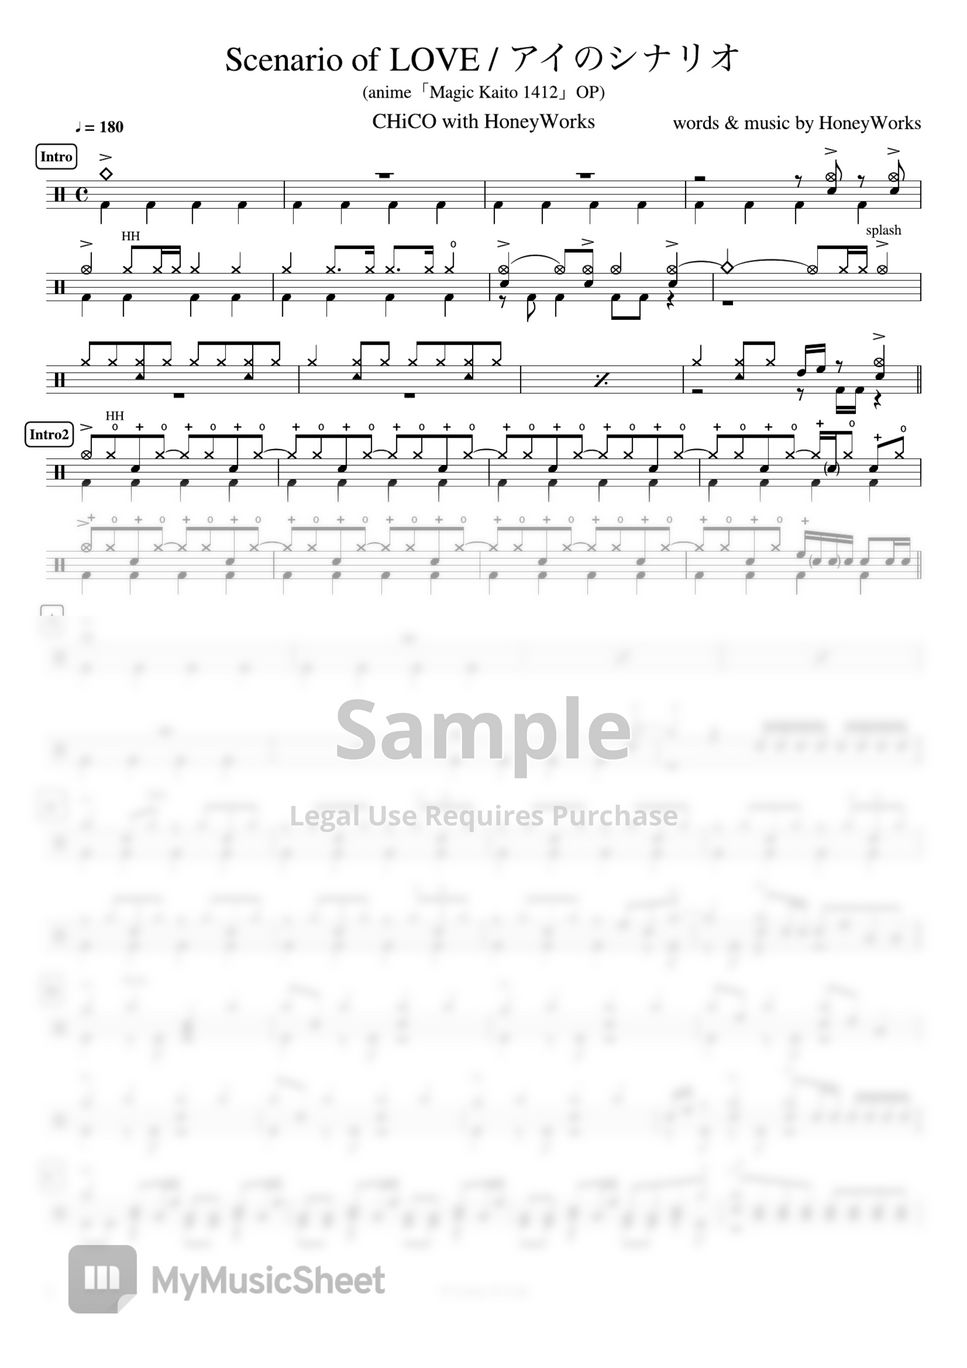 CHiCO with HoneyWorks - Scenario of LOVE / アイのシナリオ by Cookai's J-pop Drum sheet music!!!